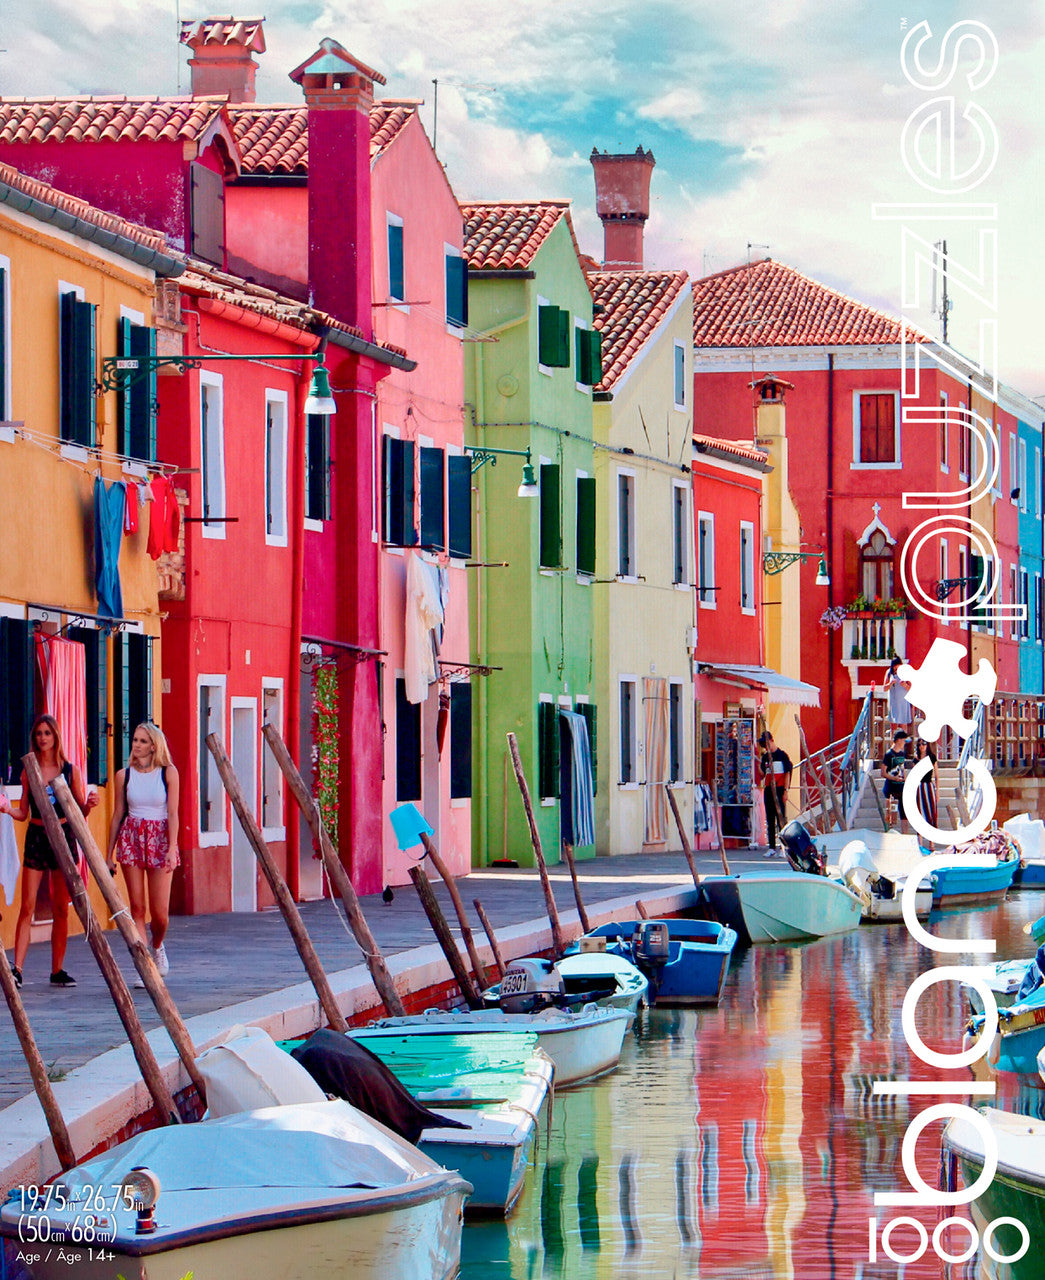 The Canals of Burano Italy